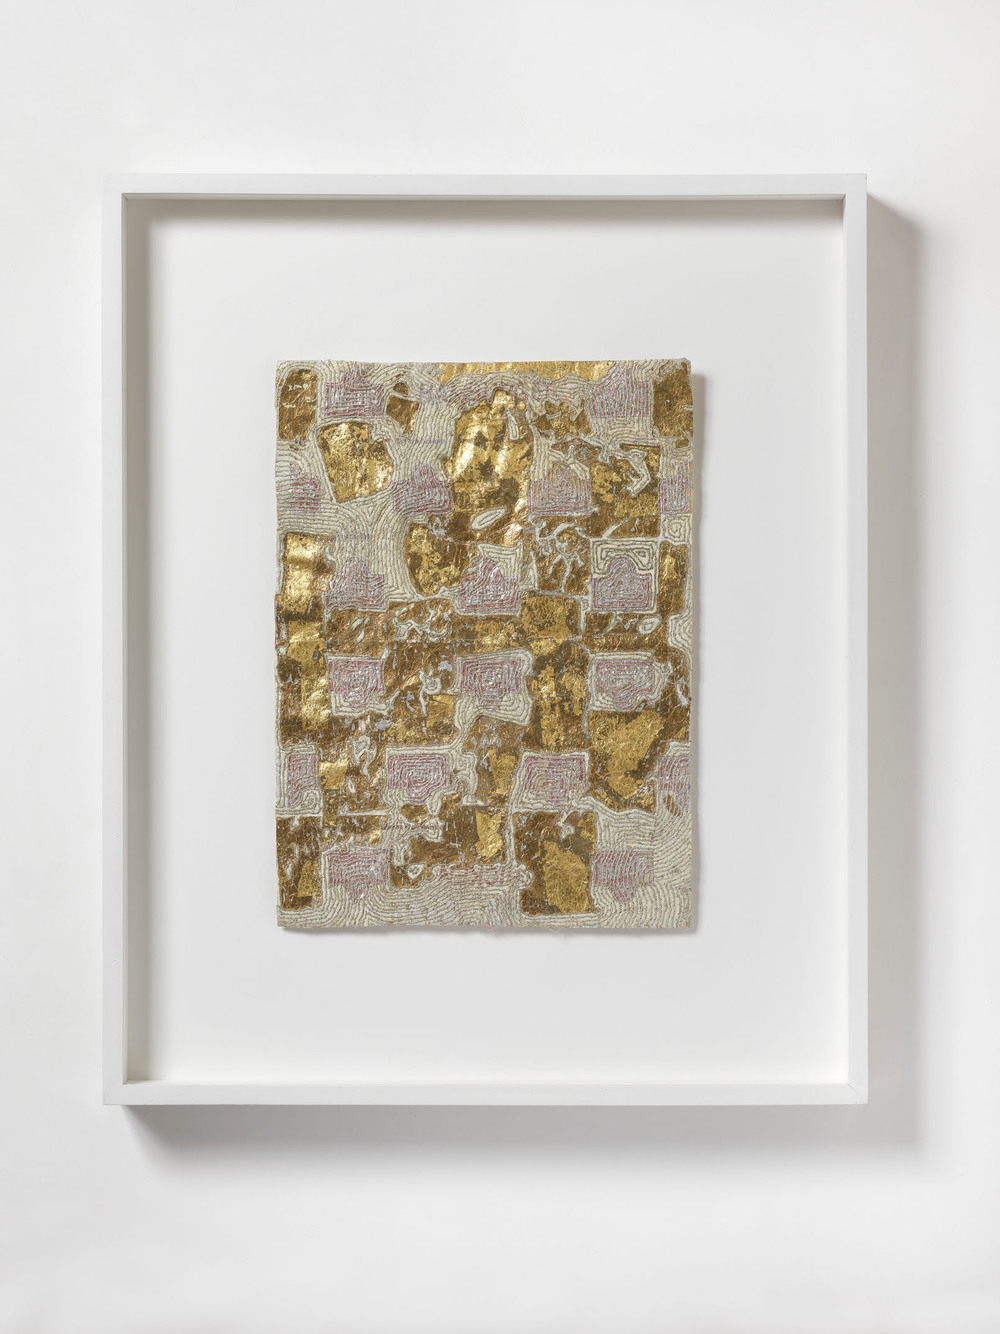 Nicola Ginzel  Selected Flatwork Wendy's Chicken Wrapper, 23 K Gold, embroidered with metallic thread by hand, oil paint